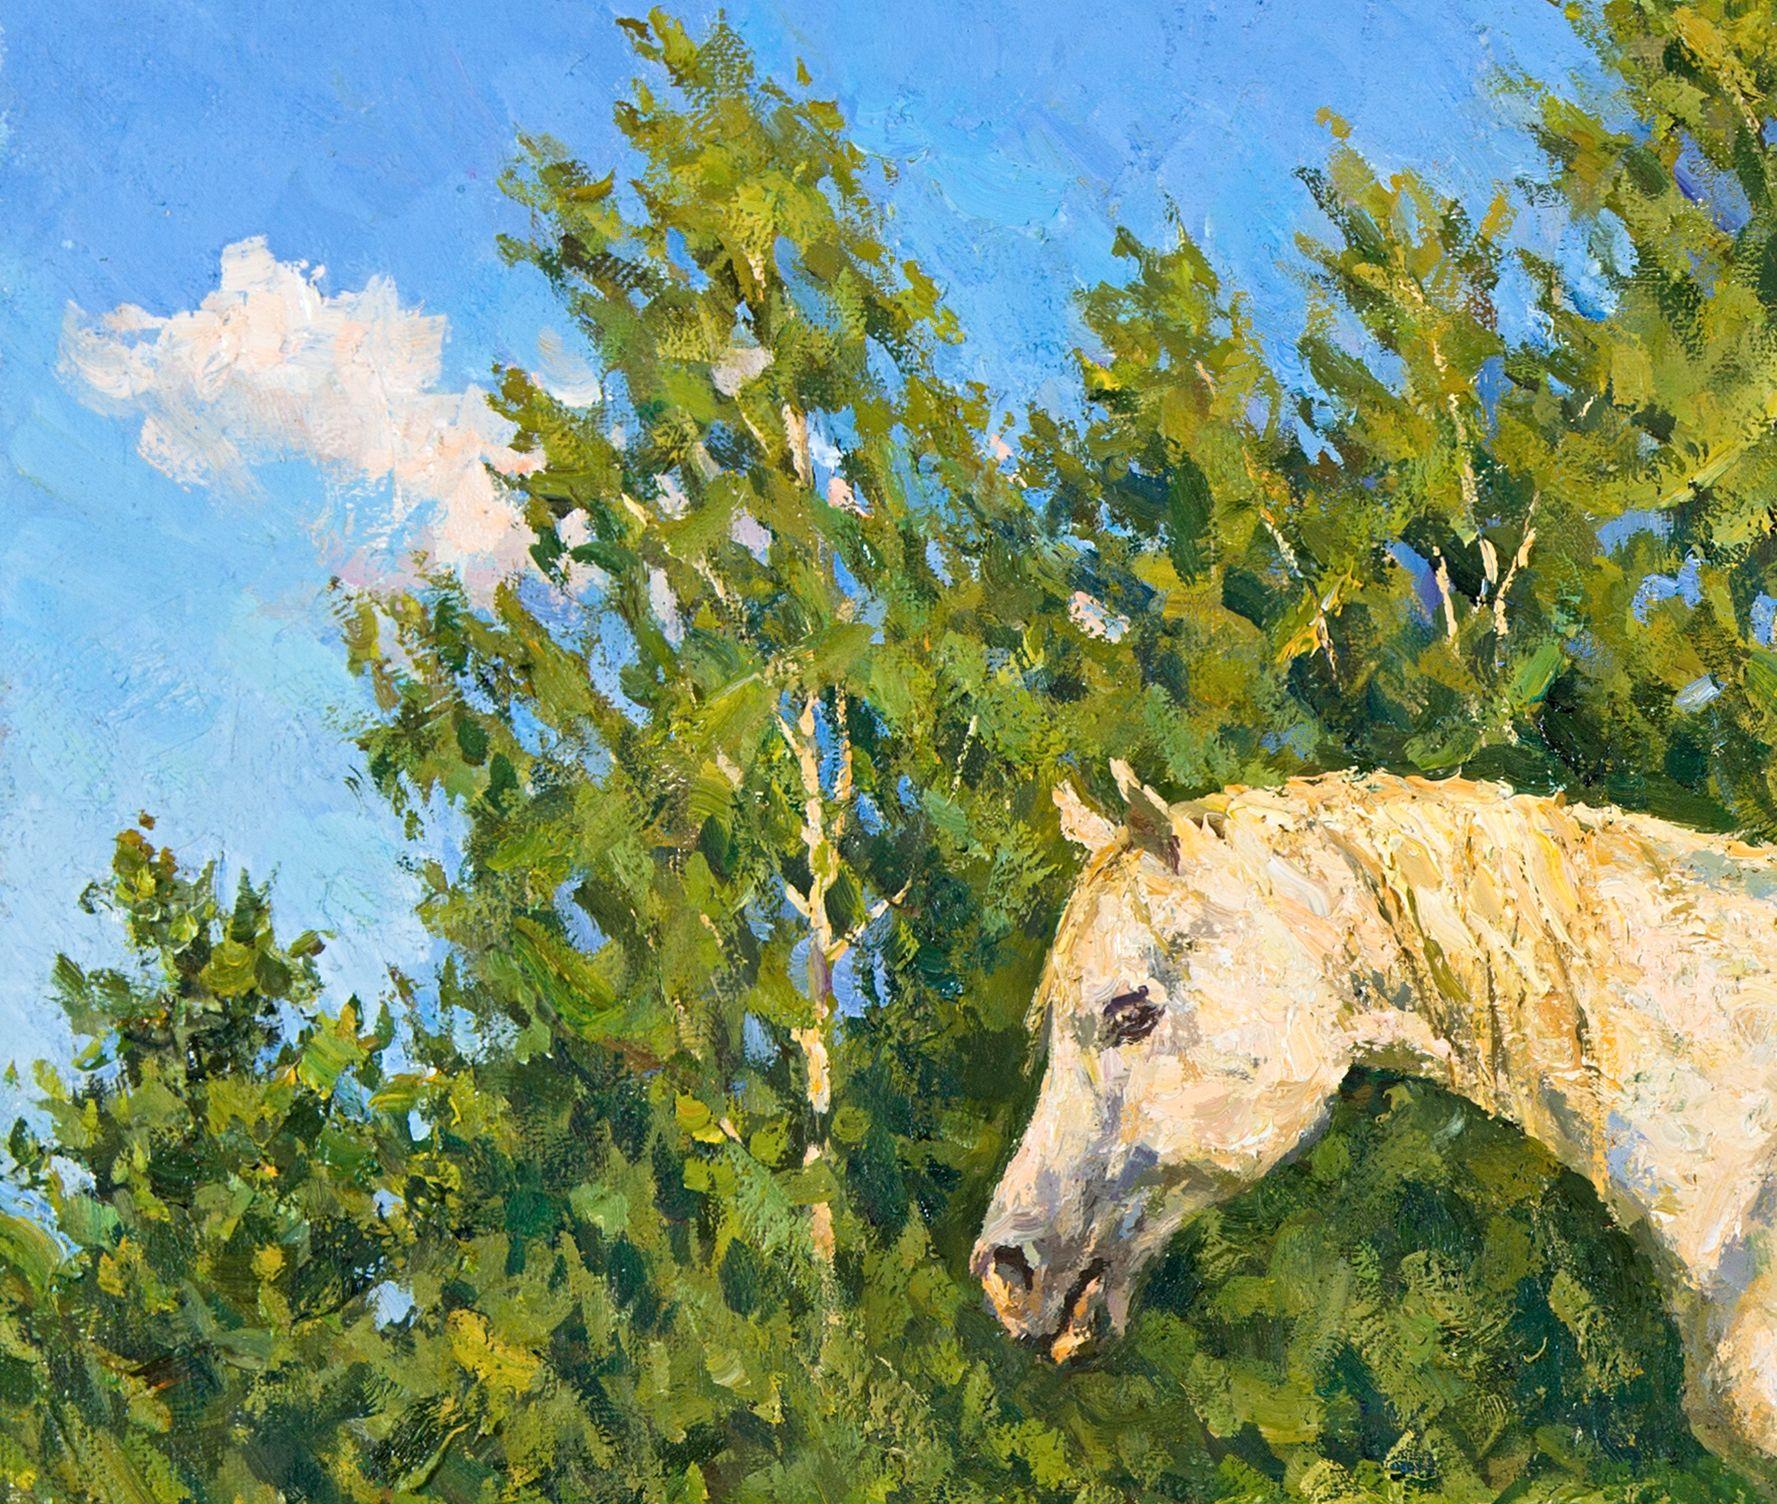 The Old Horse, Painting, Oil on Canvas 4